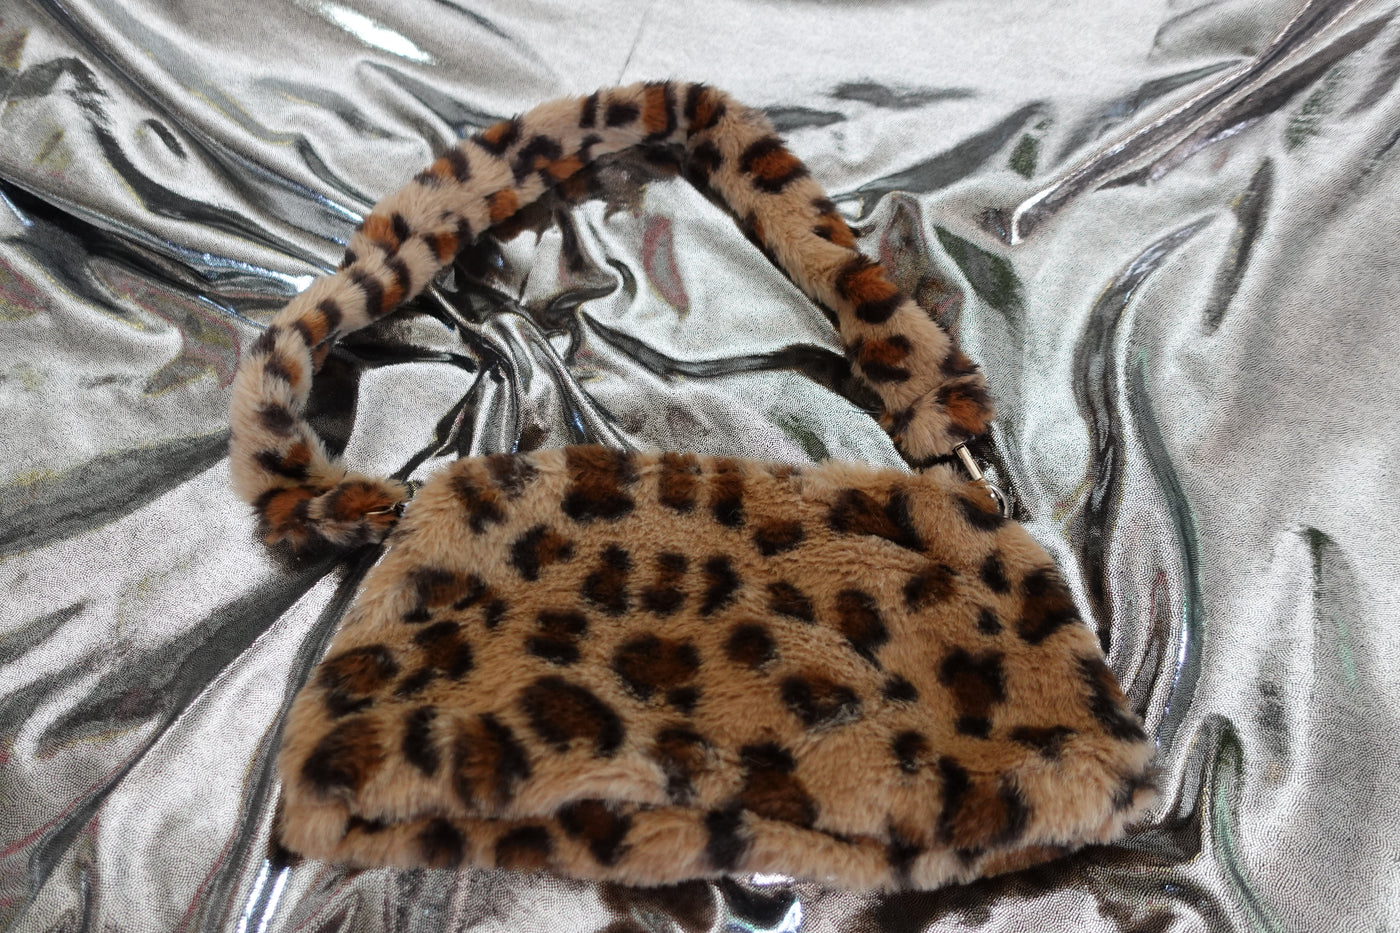 Fuzzy Mini Purse - Leopard Print or Baby blue plaid purse with button